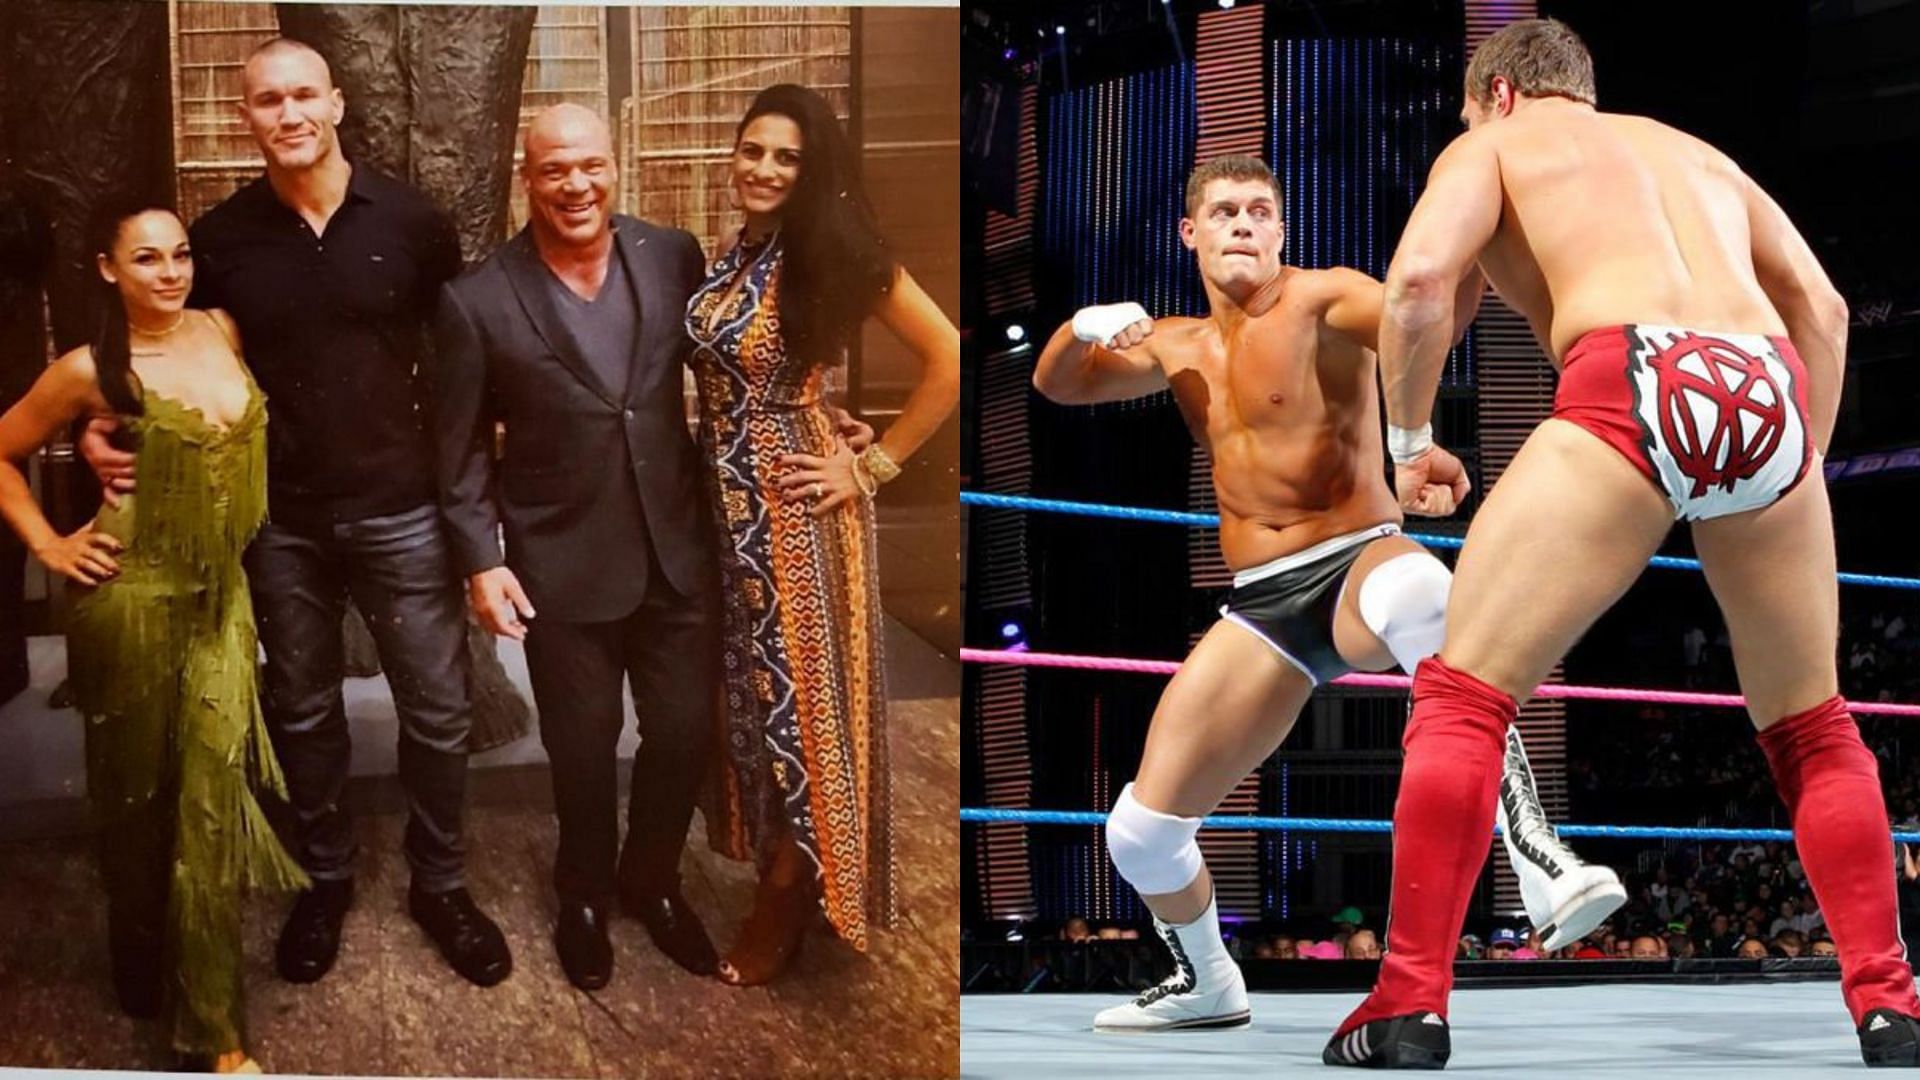 Randy Orton &amp; Kurt Angle with their wives (left) and Bryan Danielson with Cody Rhodes (right)